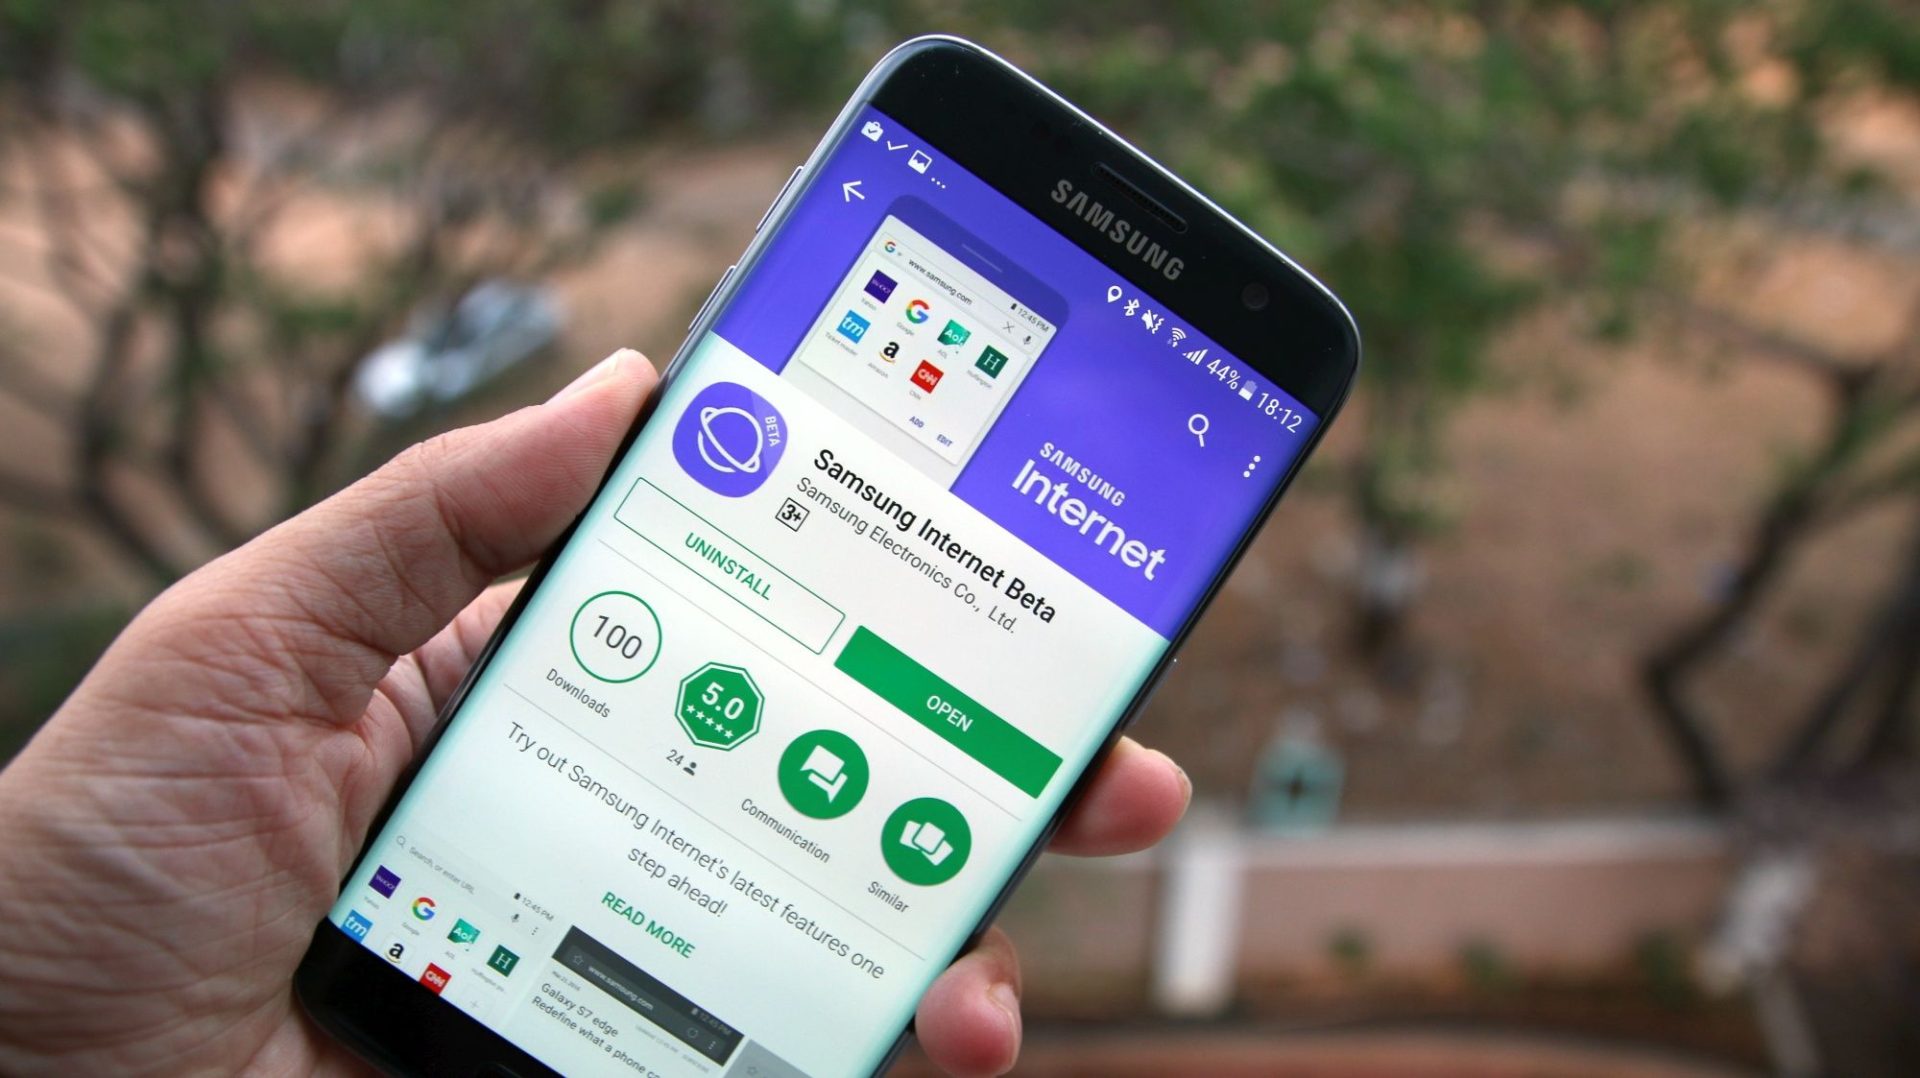 Samsung Internet browser For Android On Google Play Store